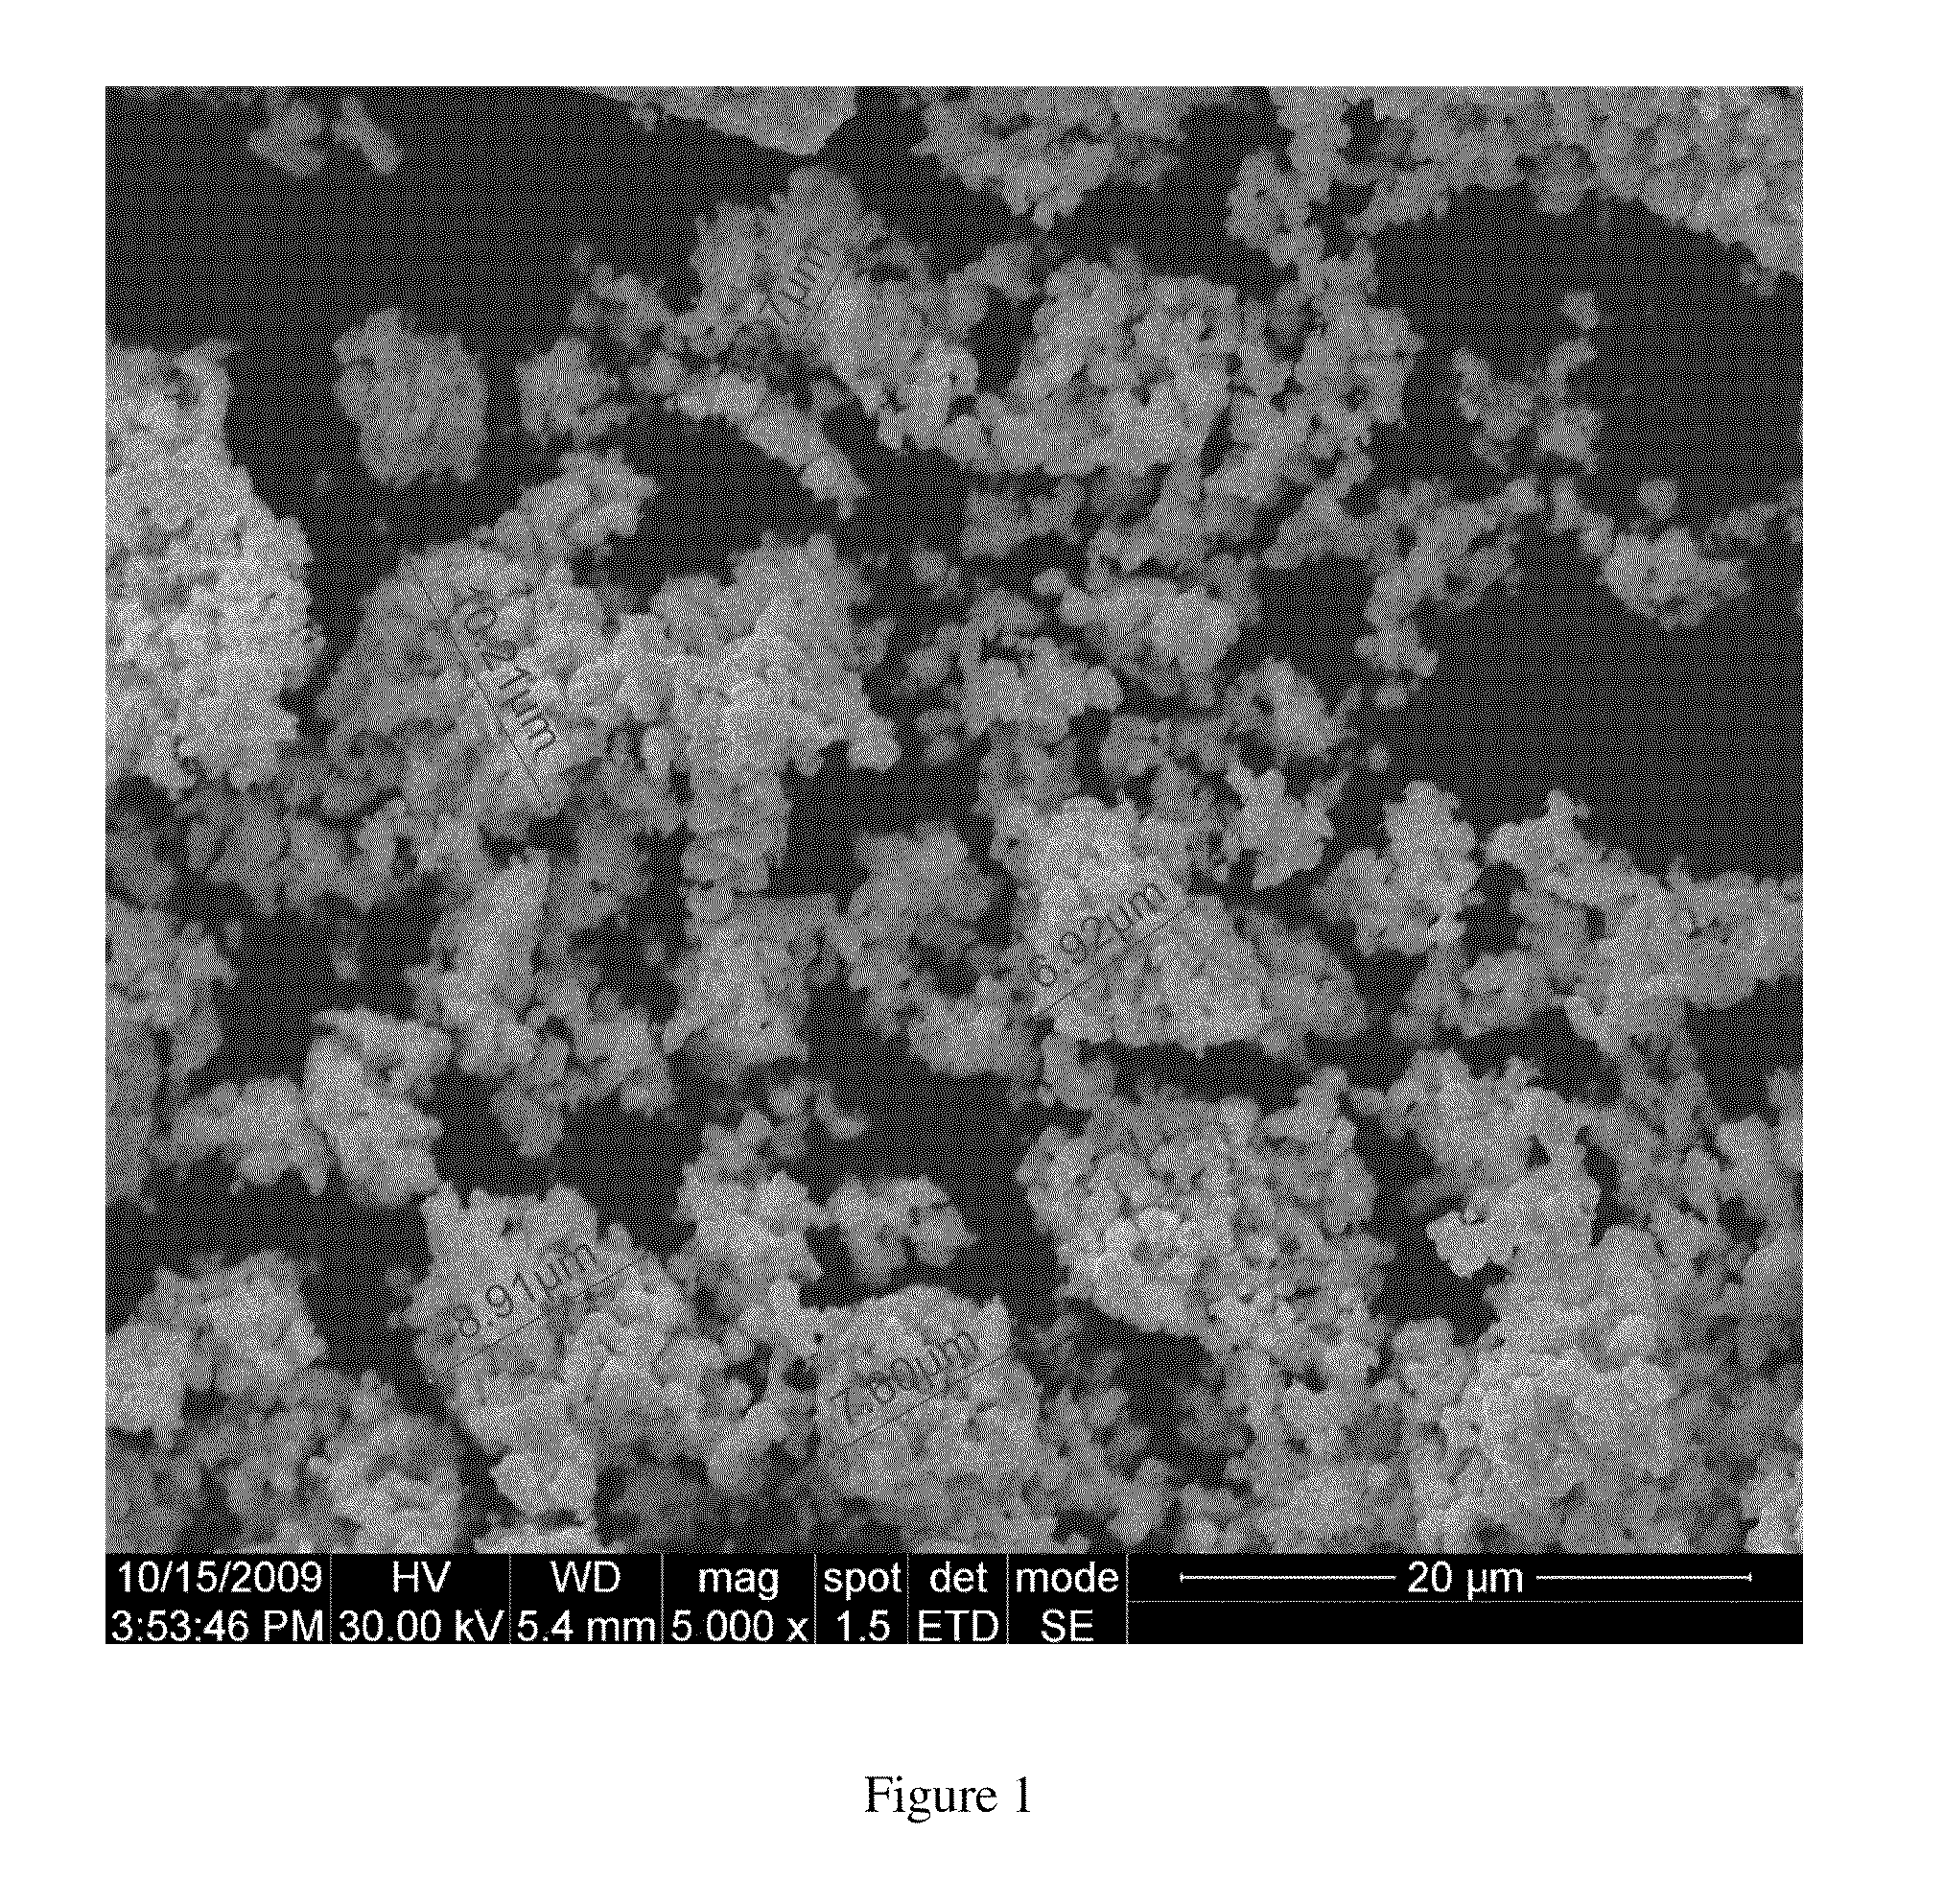 Porous clusters of silver powder comprising zirconium oxide for use in gas diffusion electrodes, and methods of production thereof